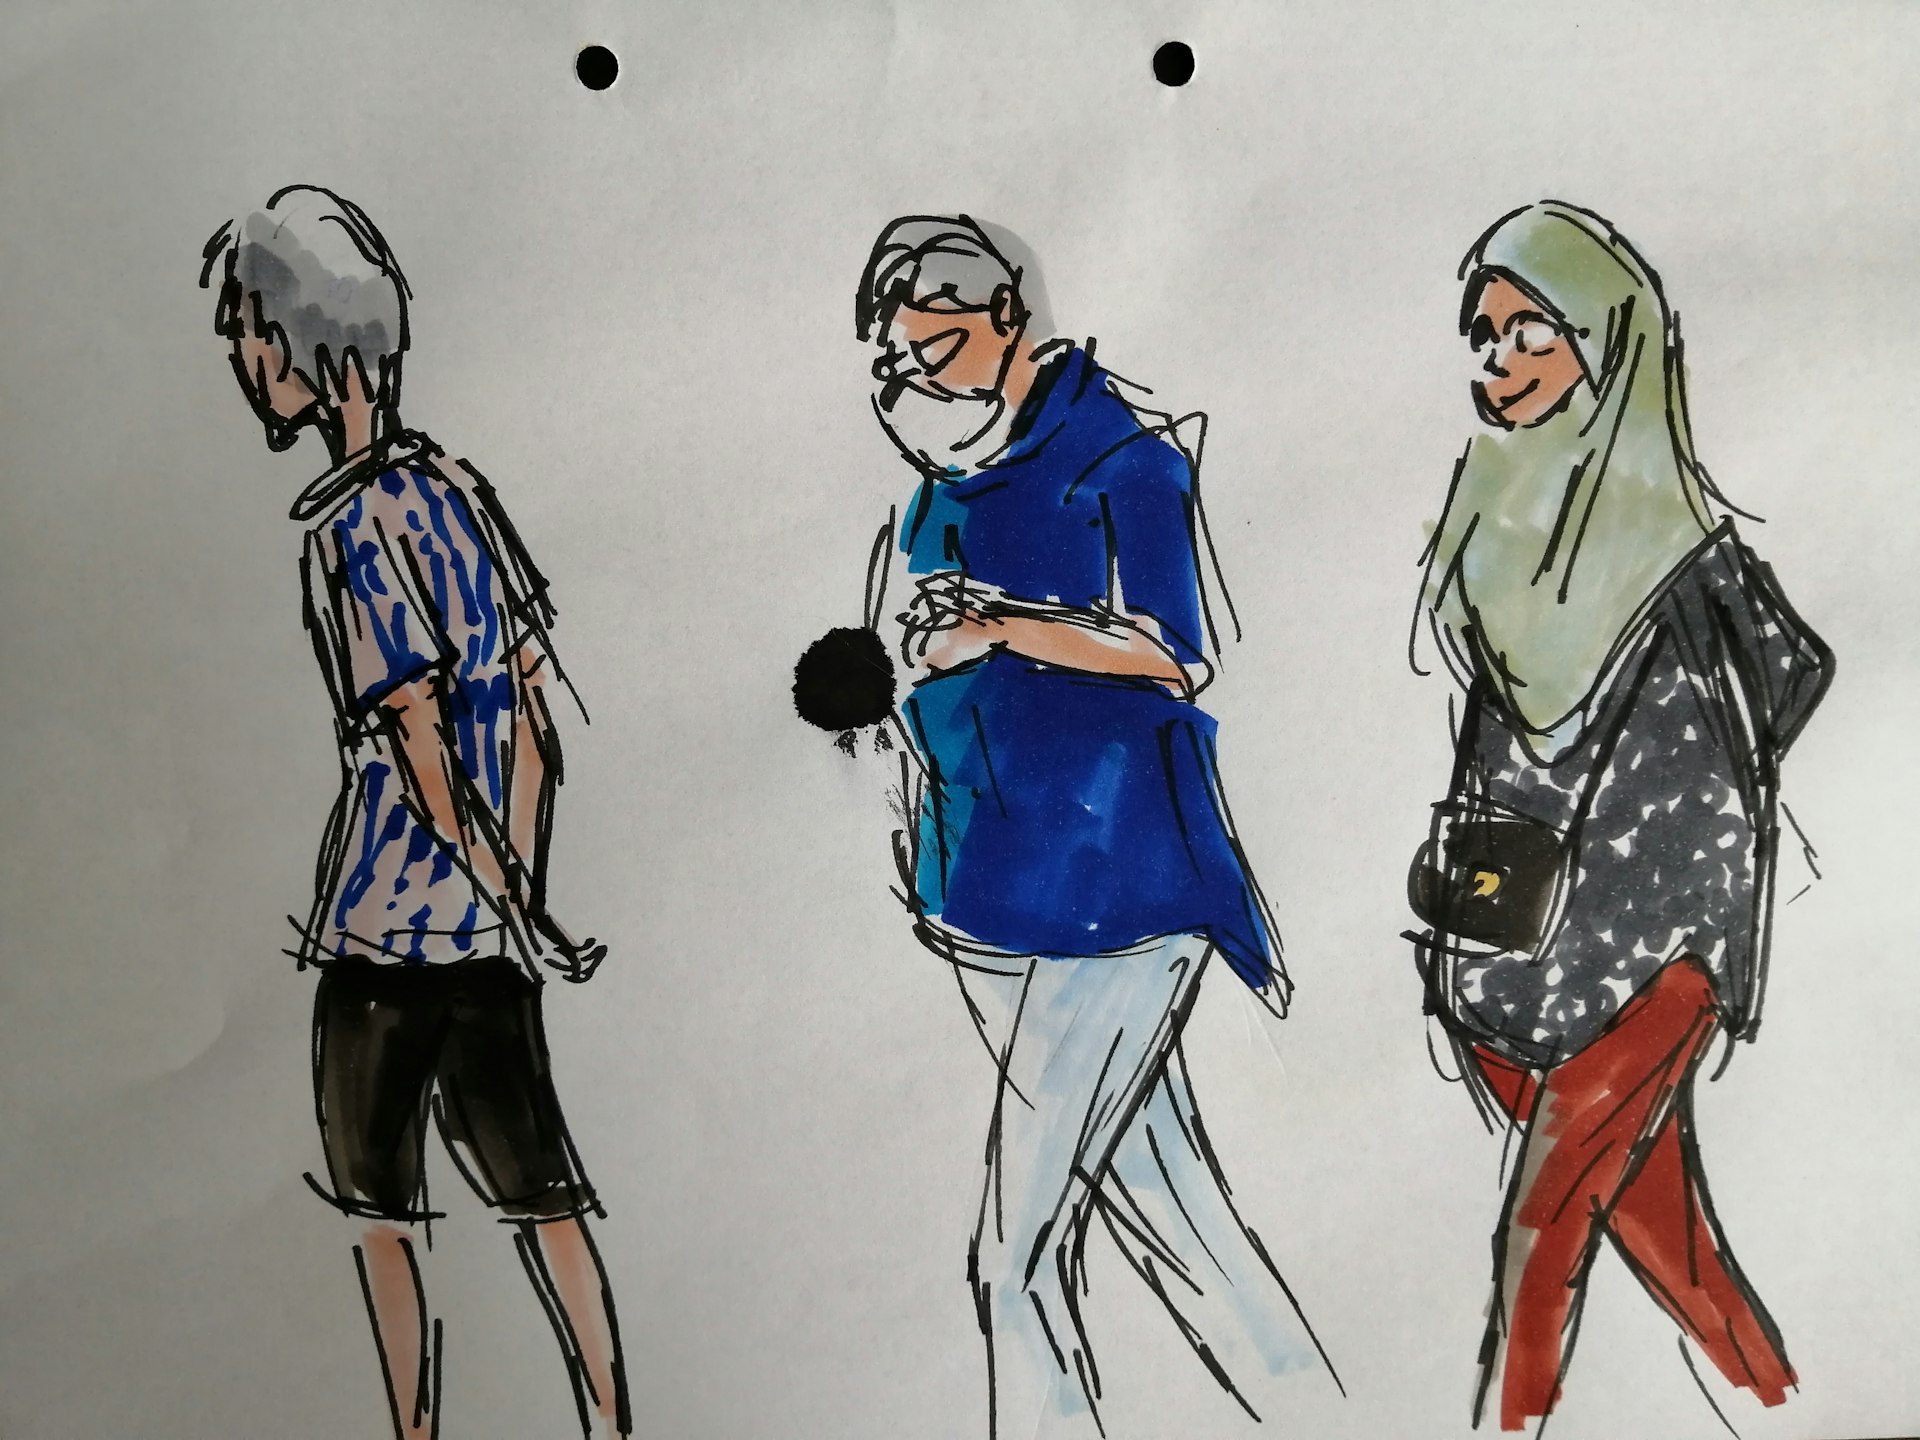 Fountain pen and copic sketches of 3 different people walking through Our Tampines Hub.